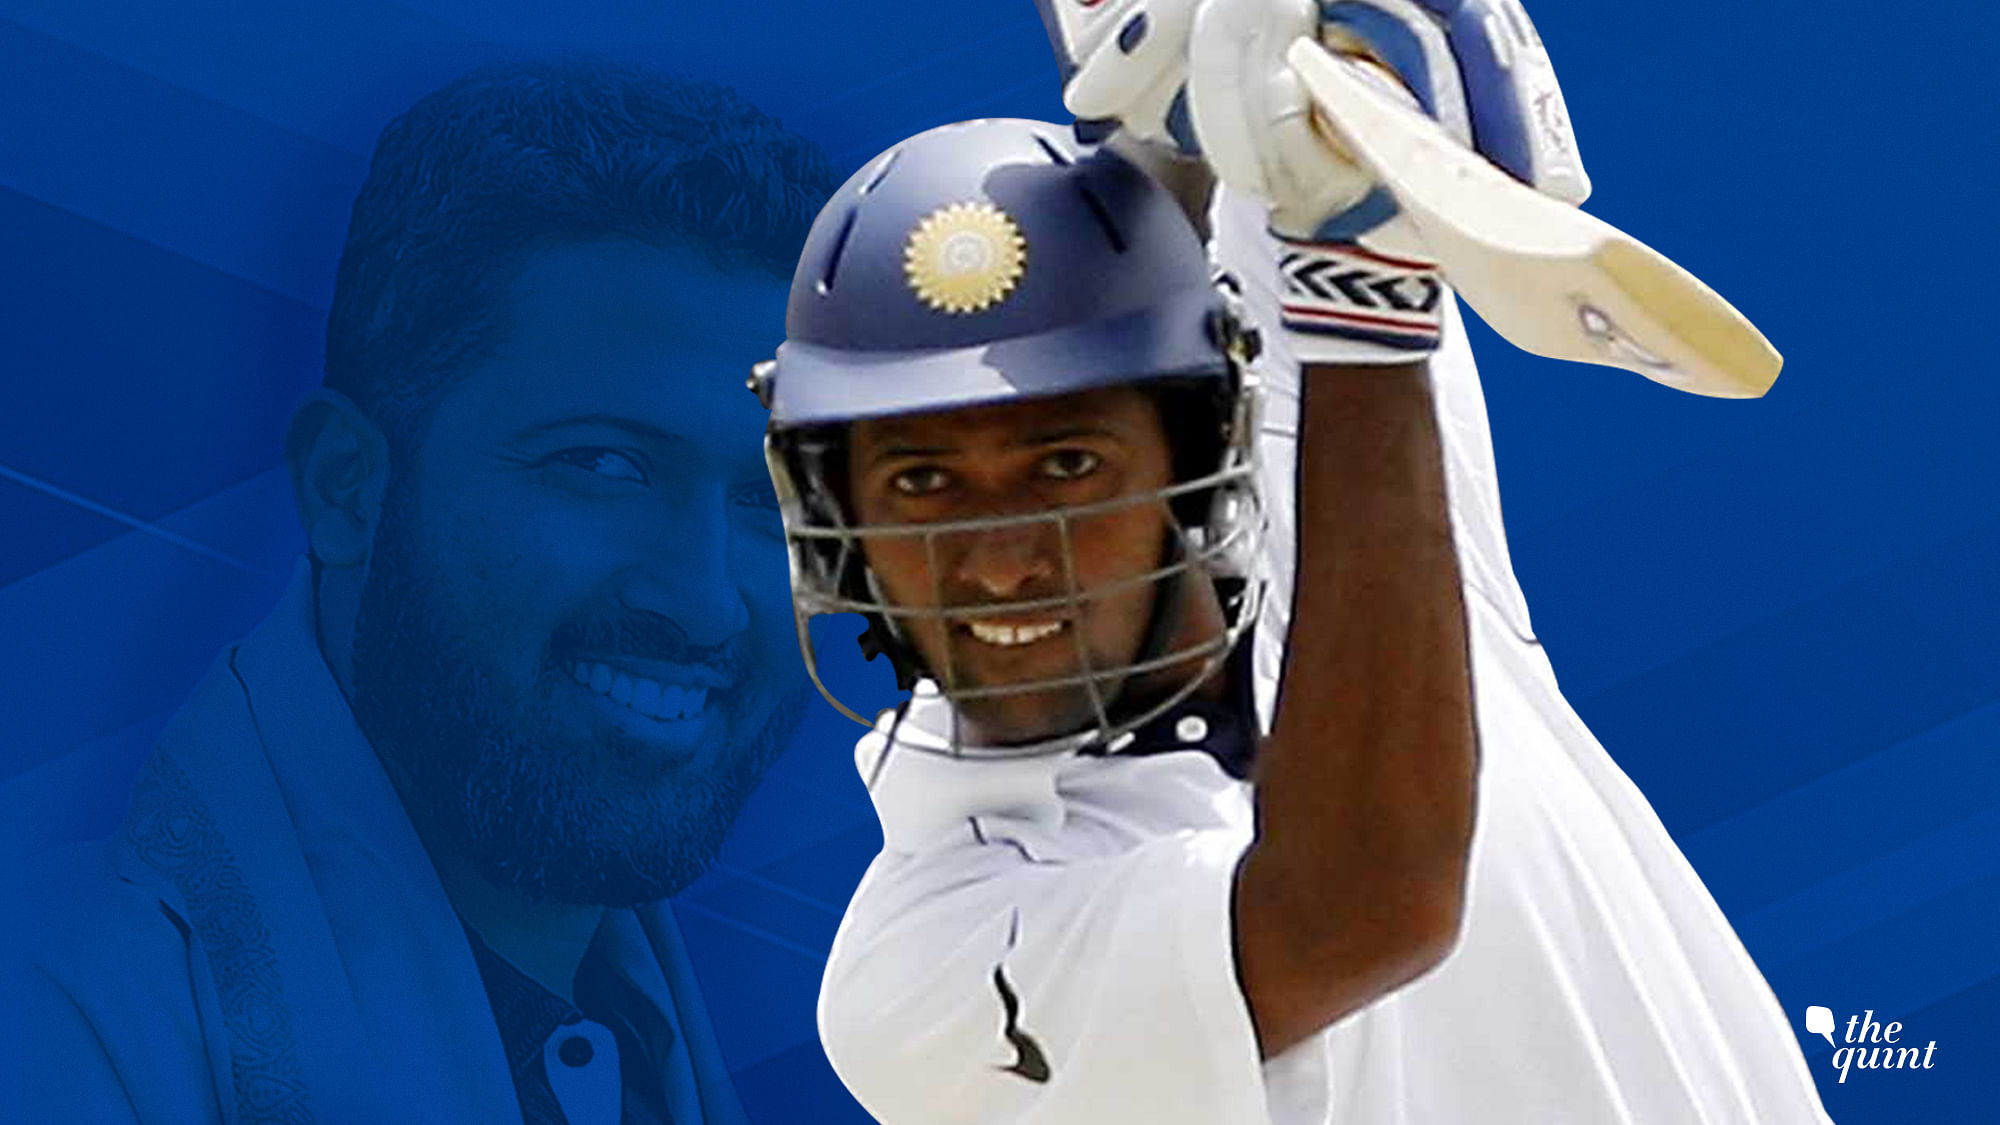 Wasim Jaffer wishes he could have played for India more.